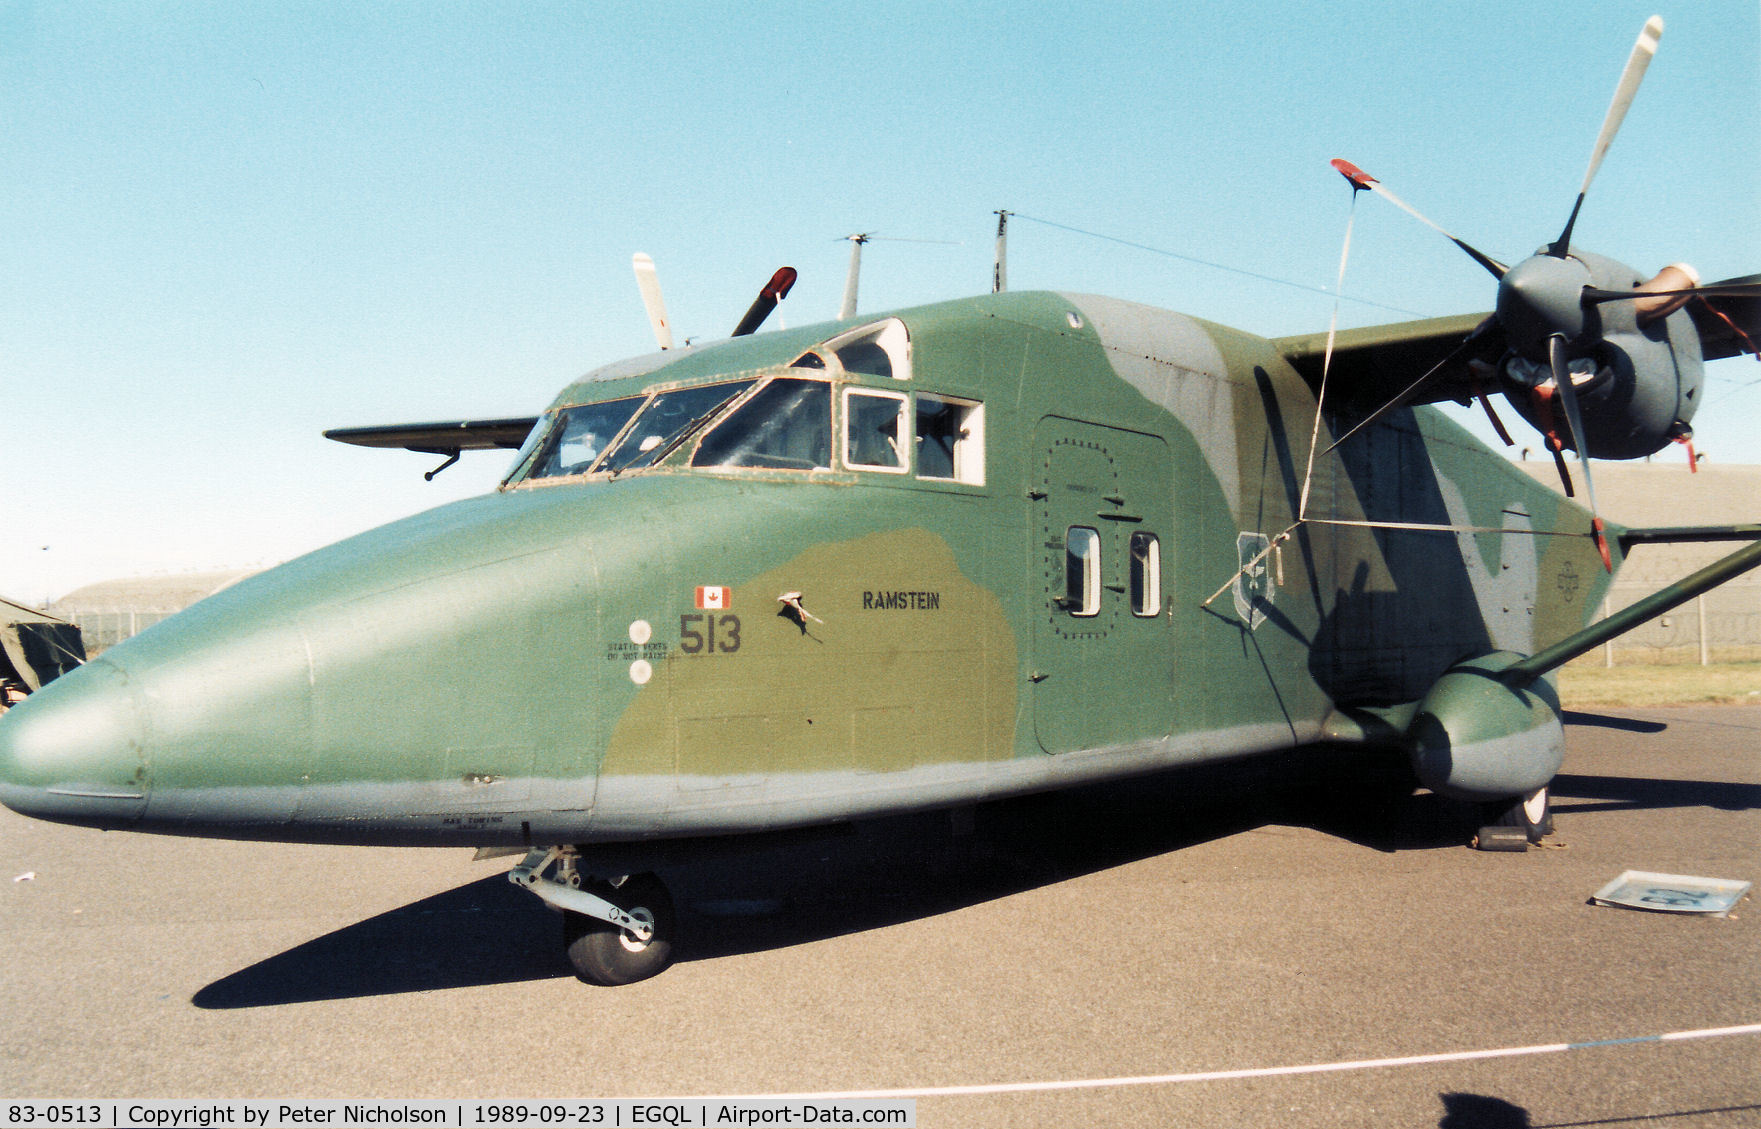 83-0513, 1983 Short C-23A Sherpa C/N SH3101, C-23A Sherpa of the 10th Military Airlift Squadron on display at the 1989 RAF Leuchars Airshow.